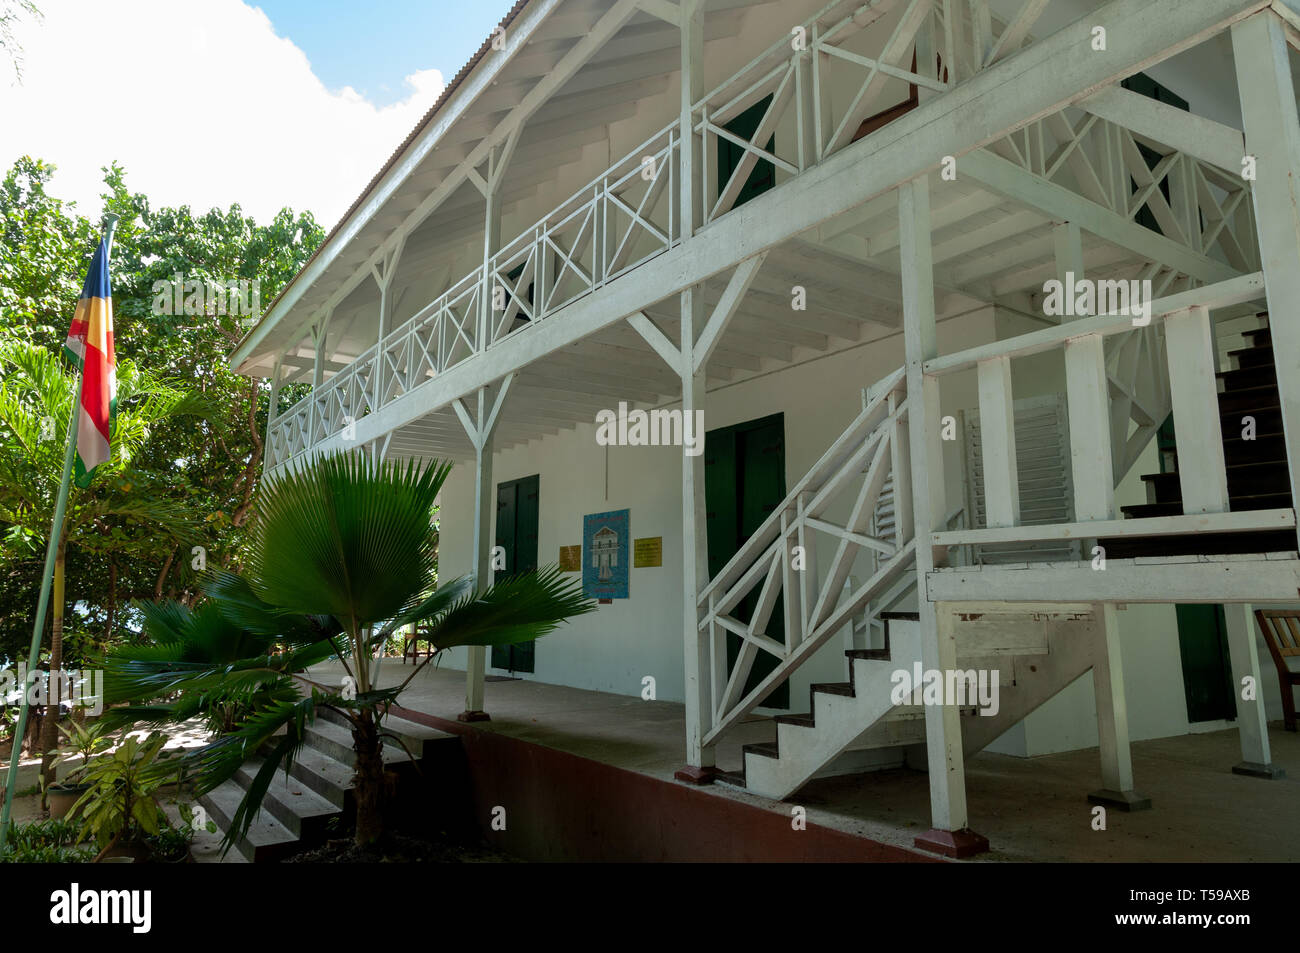 The Doctor's House is a building former physician's residence at Anse St. Joseph (now an educational center and museum). Curieuse Island, seychelles Stock Photo